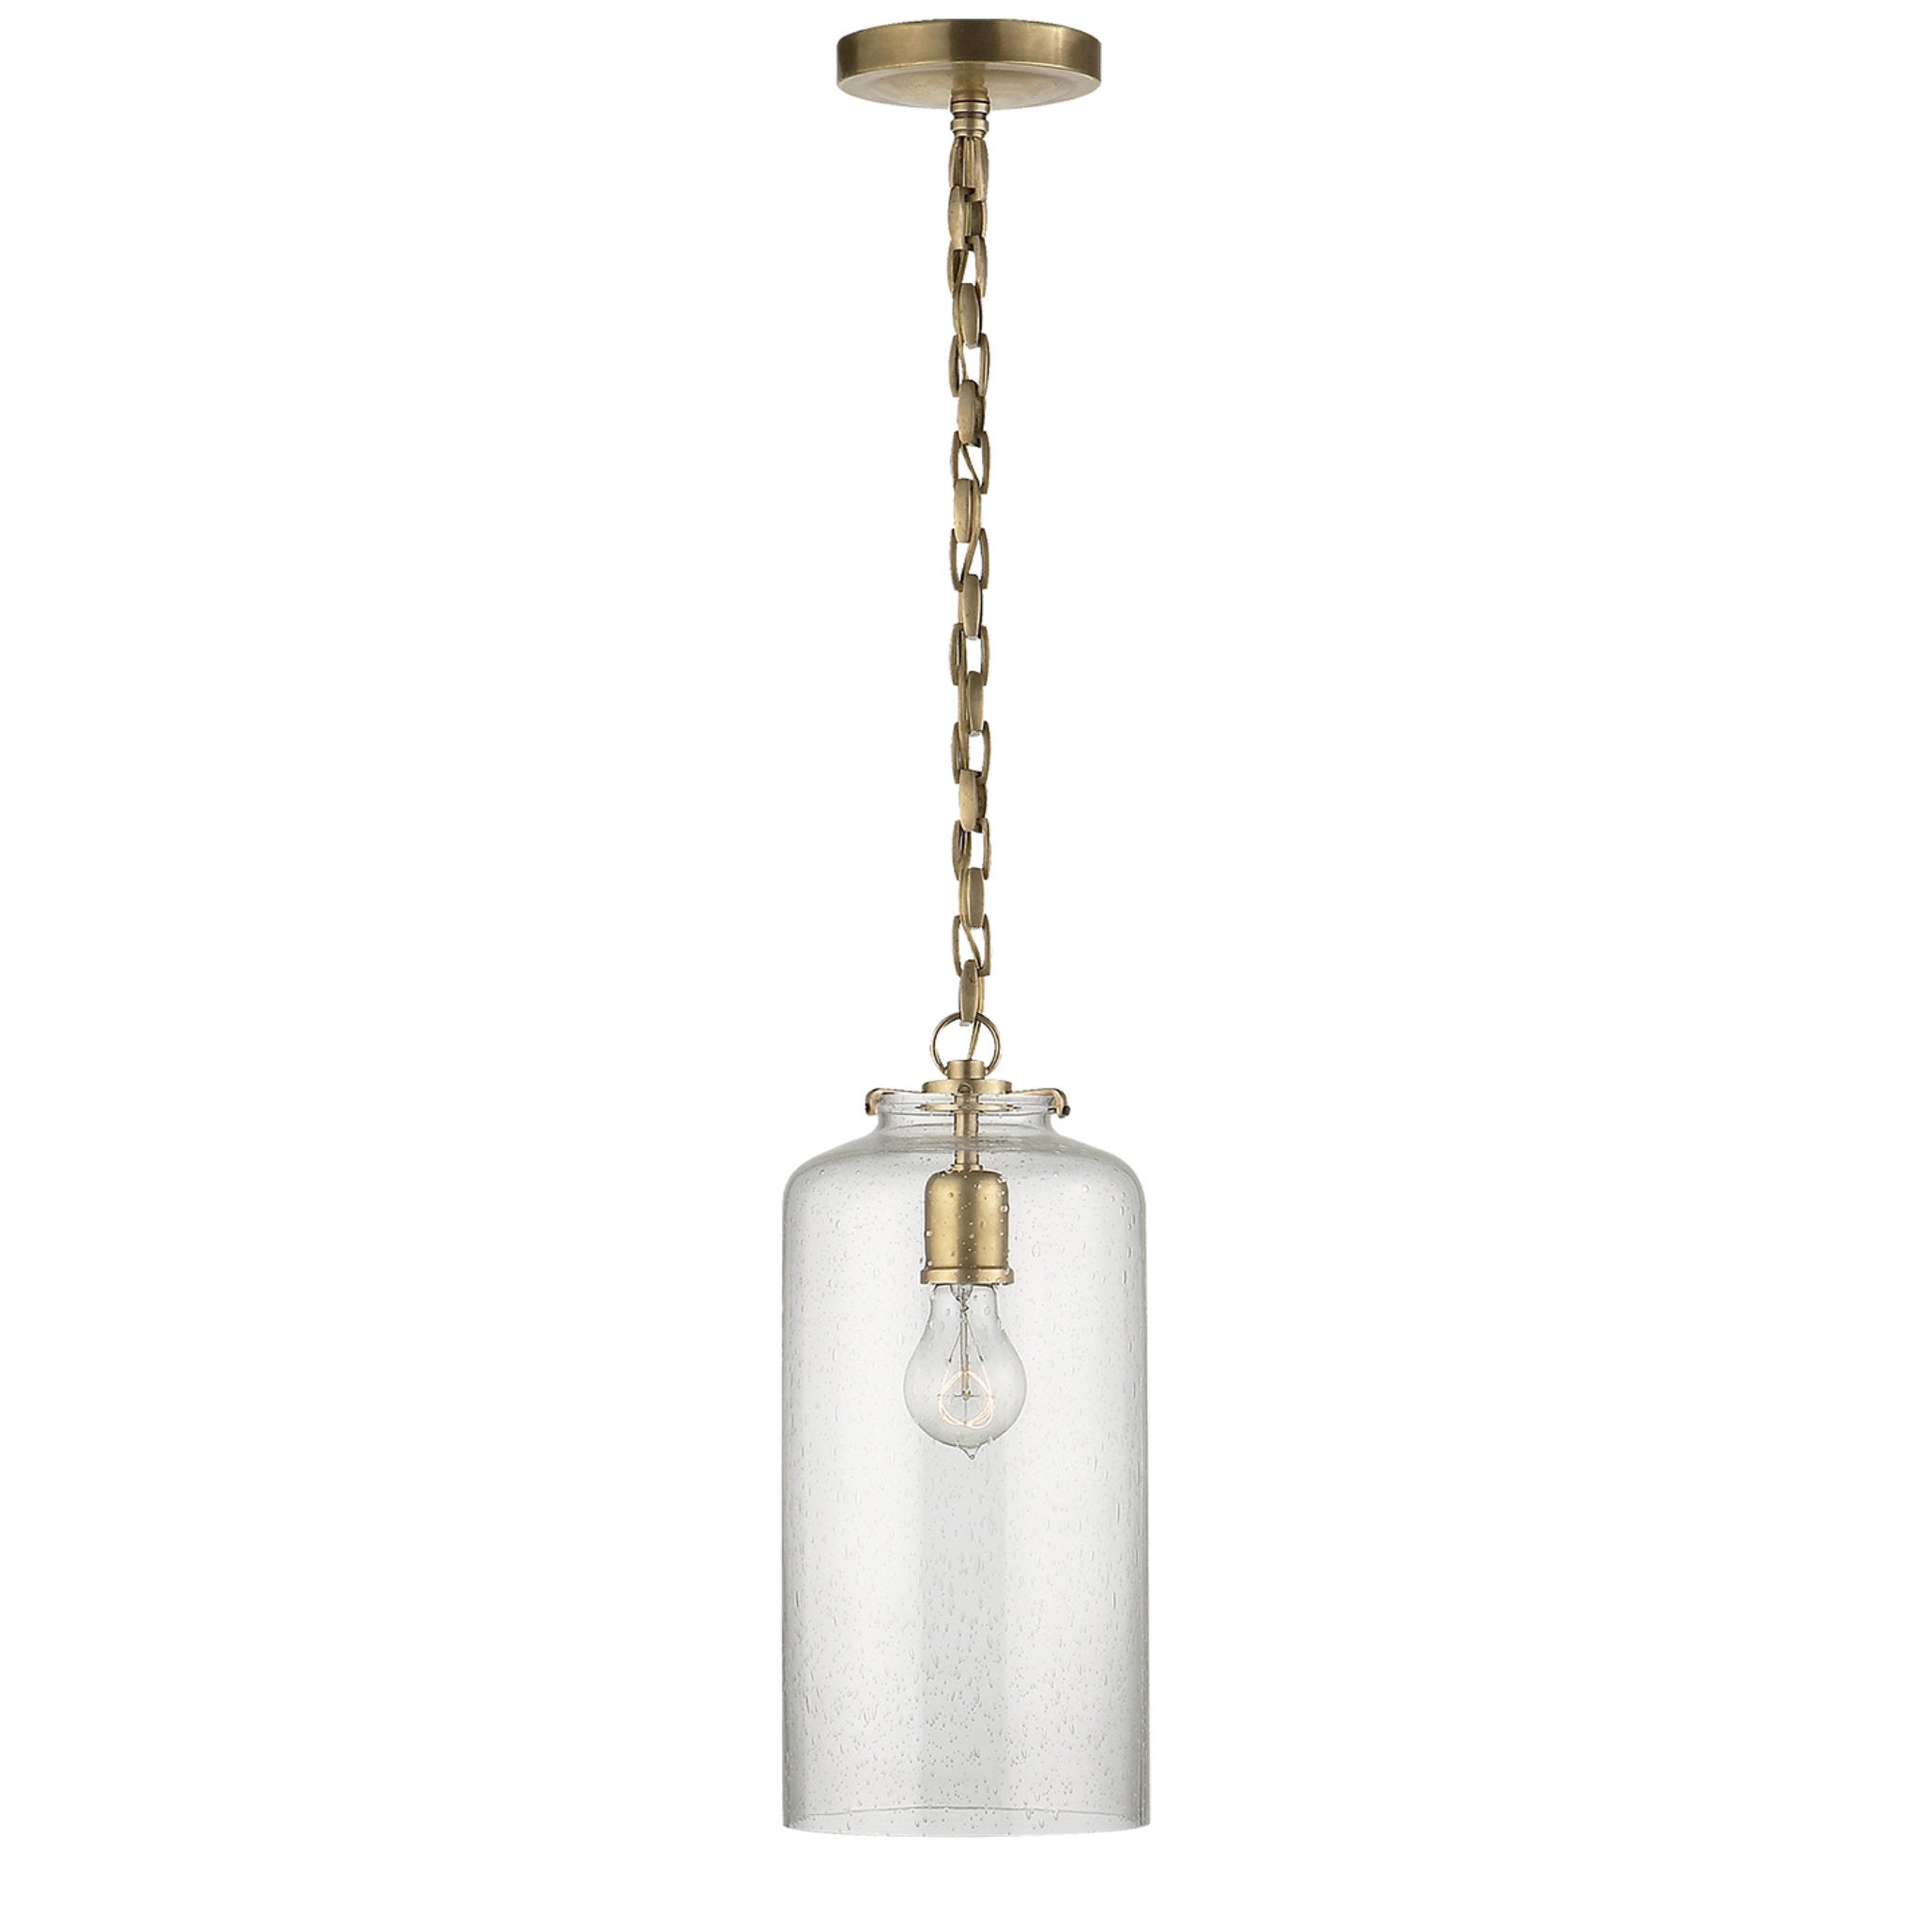 Thomas O'Brien Katie Cylinder Pendant in Hand-Rubbed Antique Brass with Seeded Glass